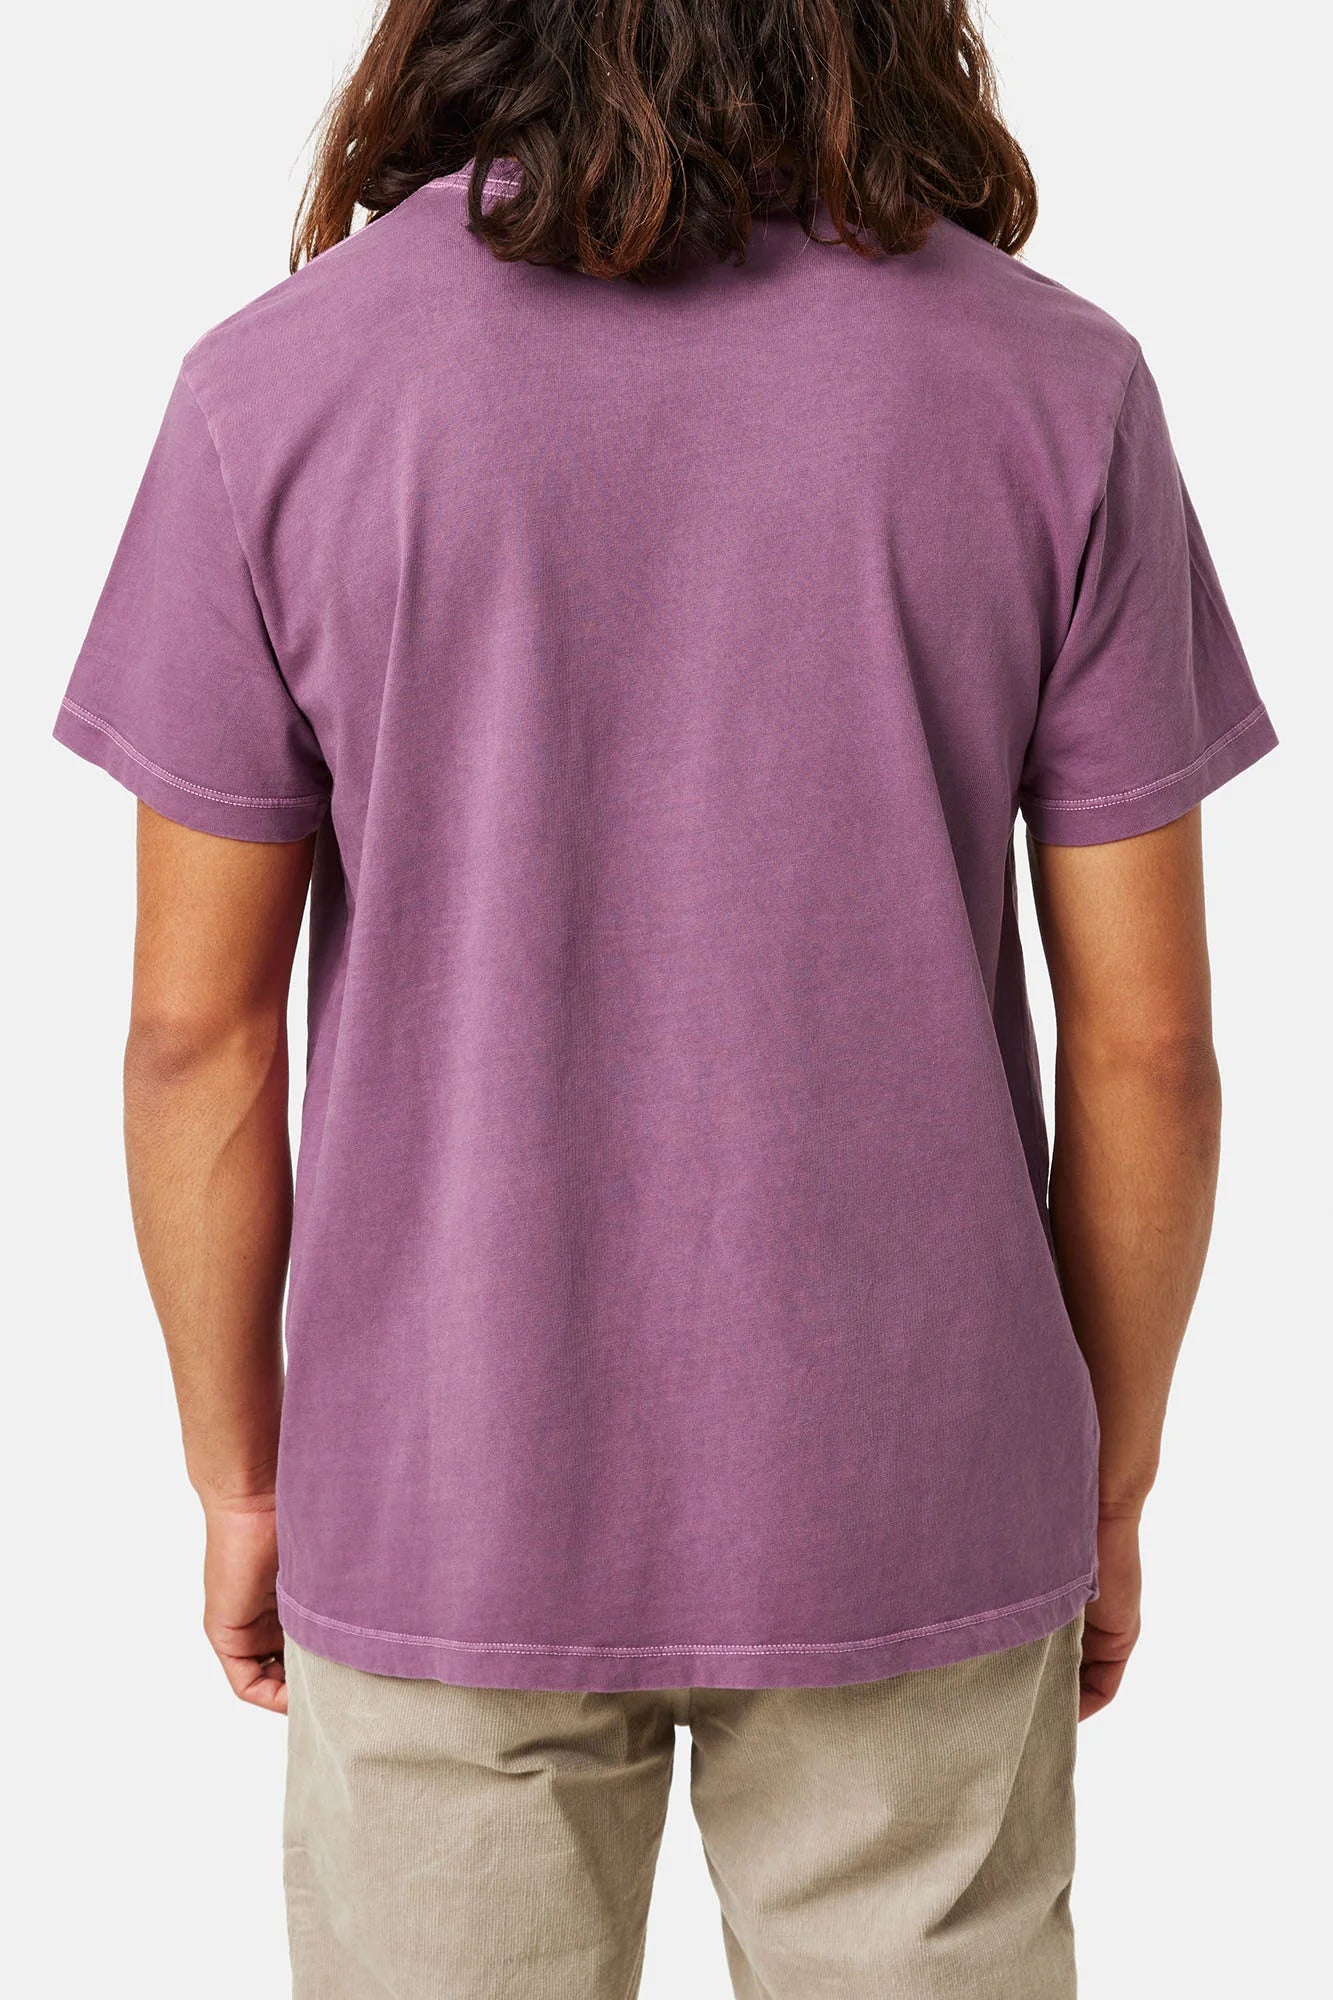 Back view of man wearing a short sleeve pocket tee in the color Kelp Red Sand Wash